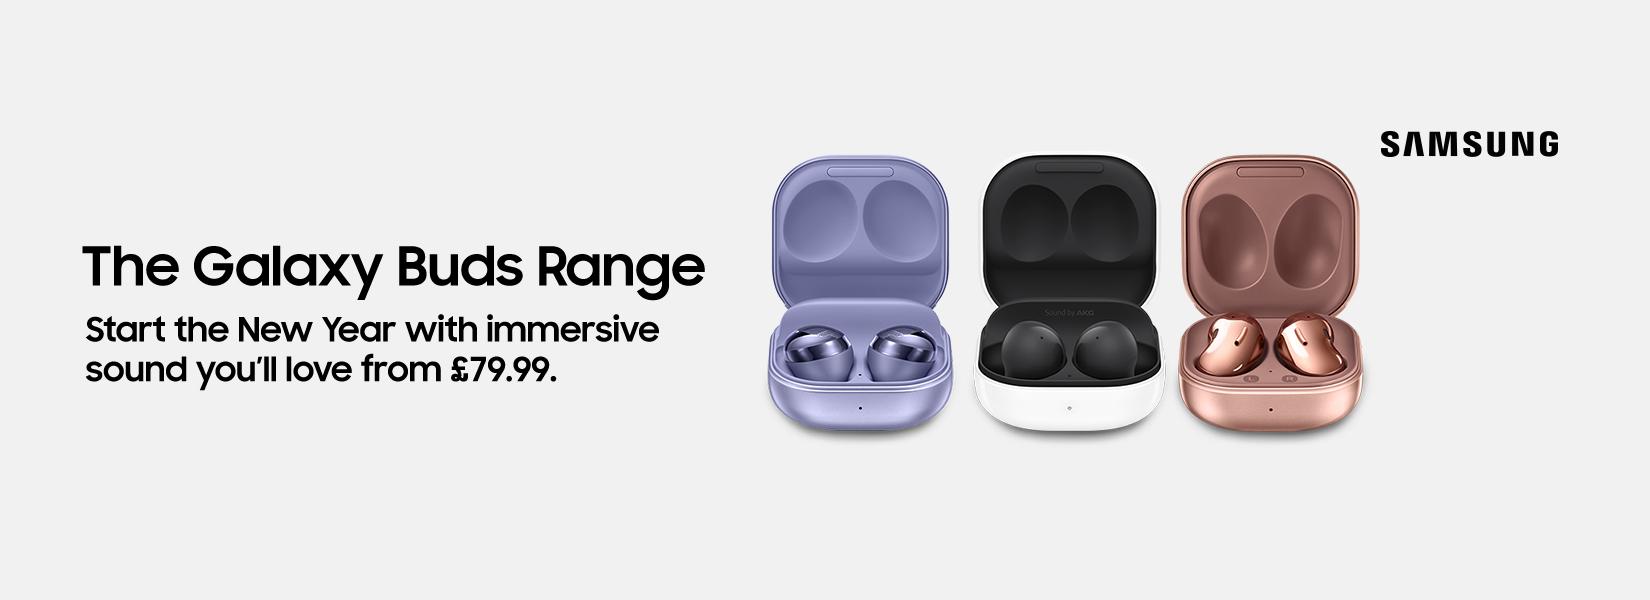 Samsung. The Galaxy Buds range start the new year with immersive sound you'll love from £79.99.